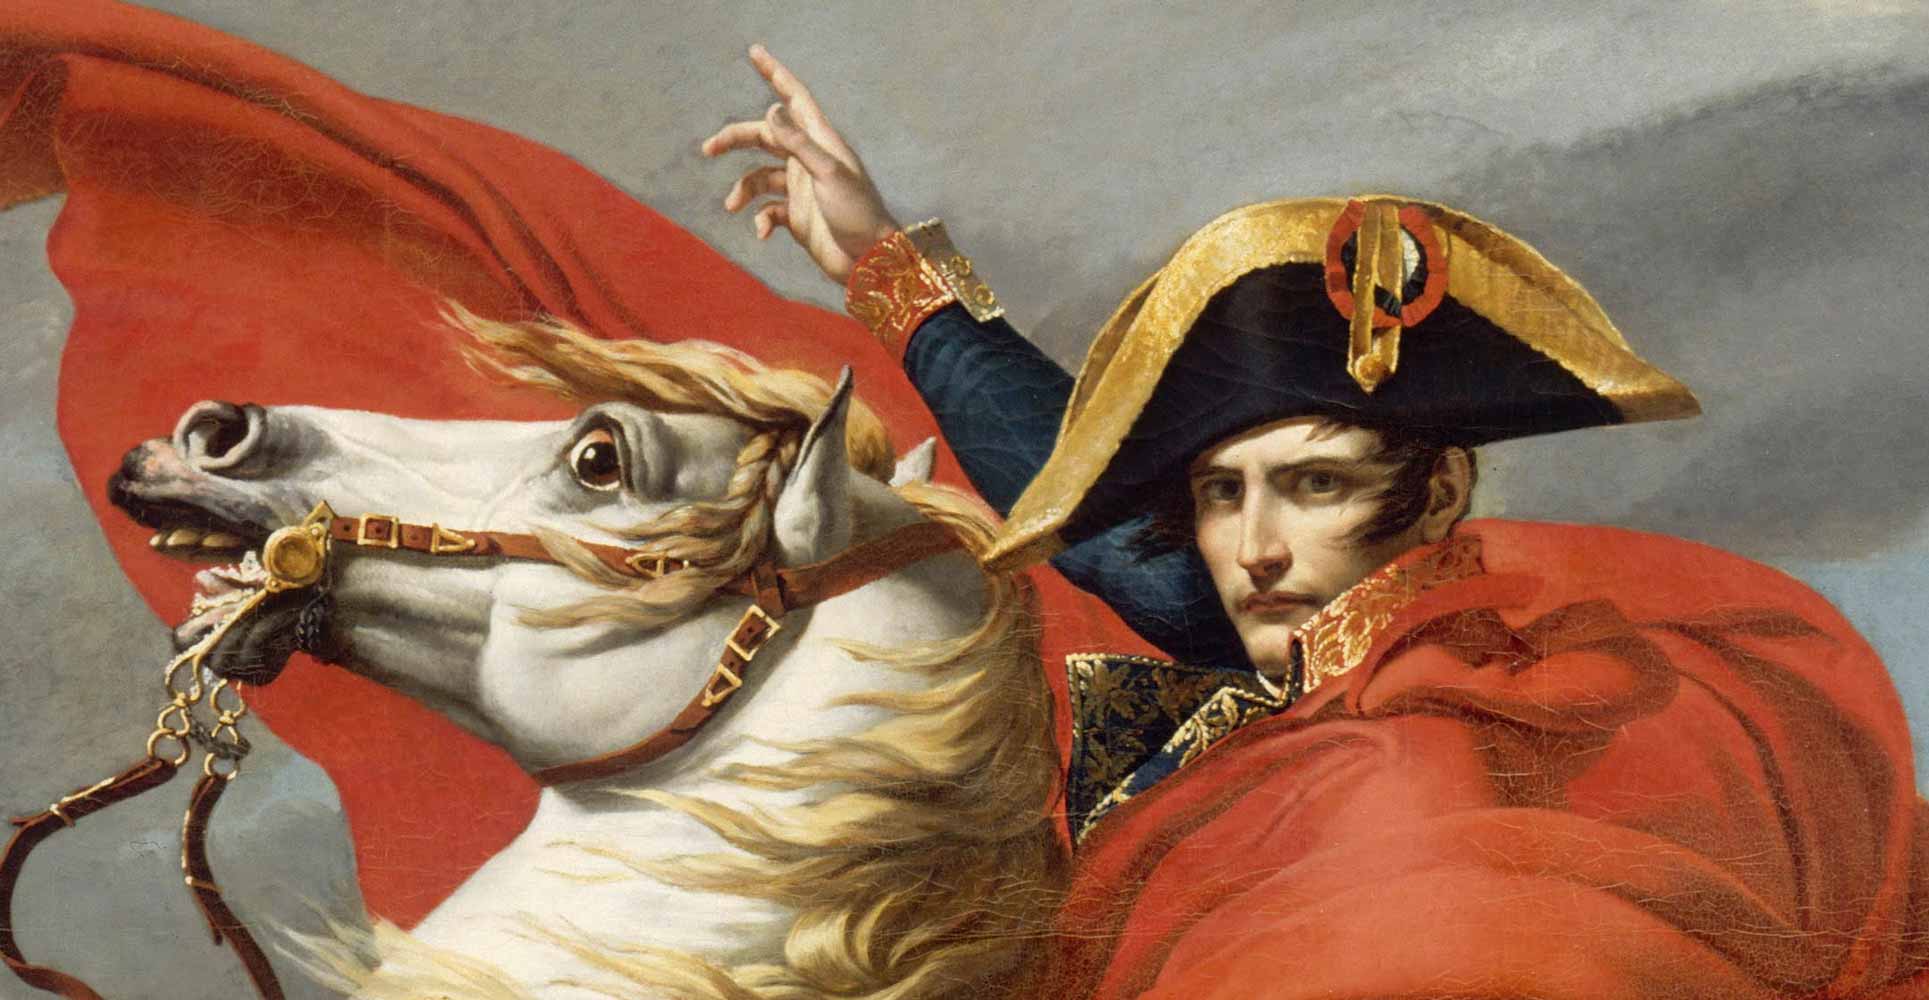 Napoleon Crossing the Alps, detail, 1800, by Jacque-Louis David, Belvedere Palace (CC0 1.0)